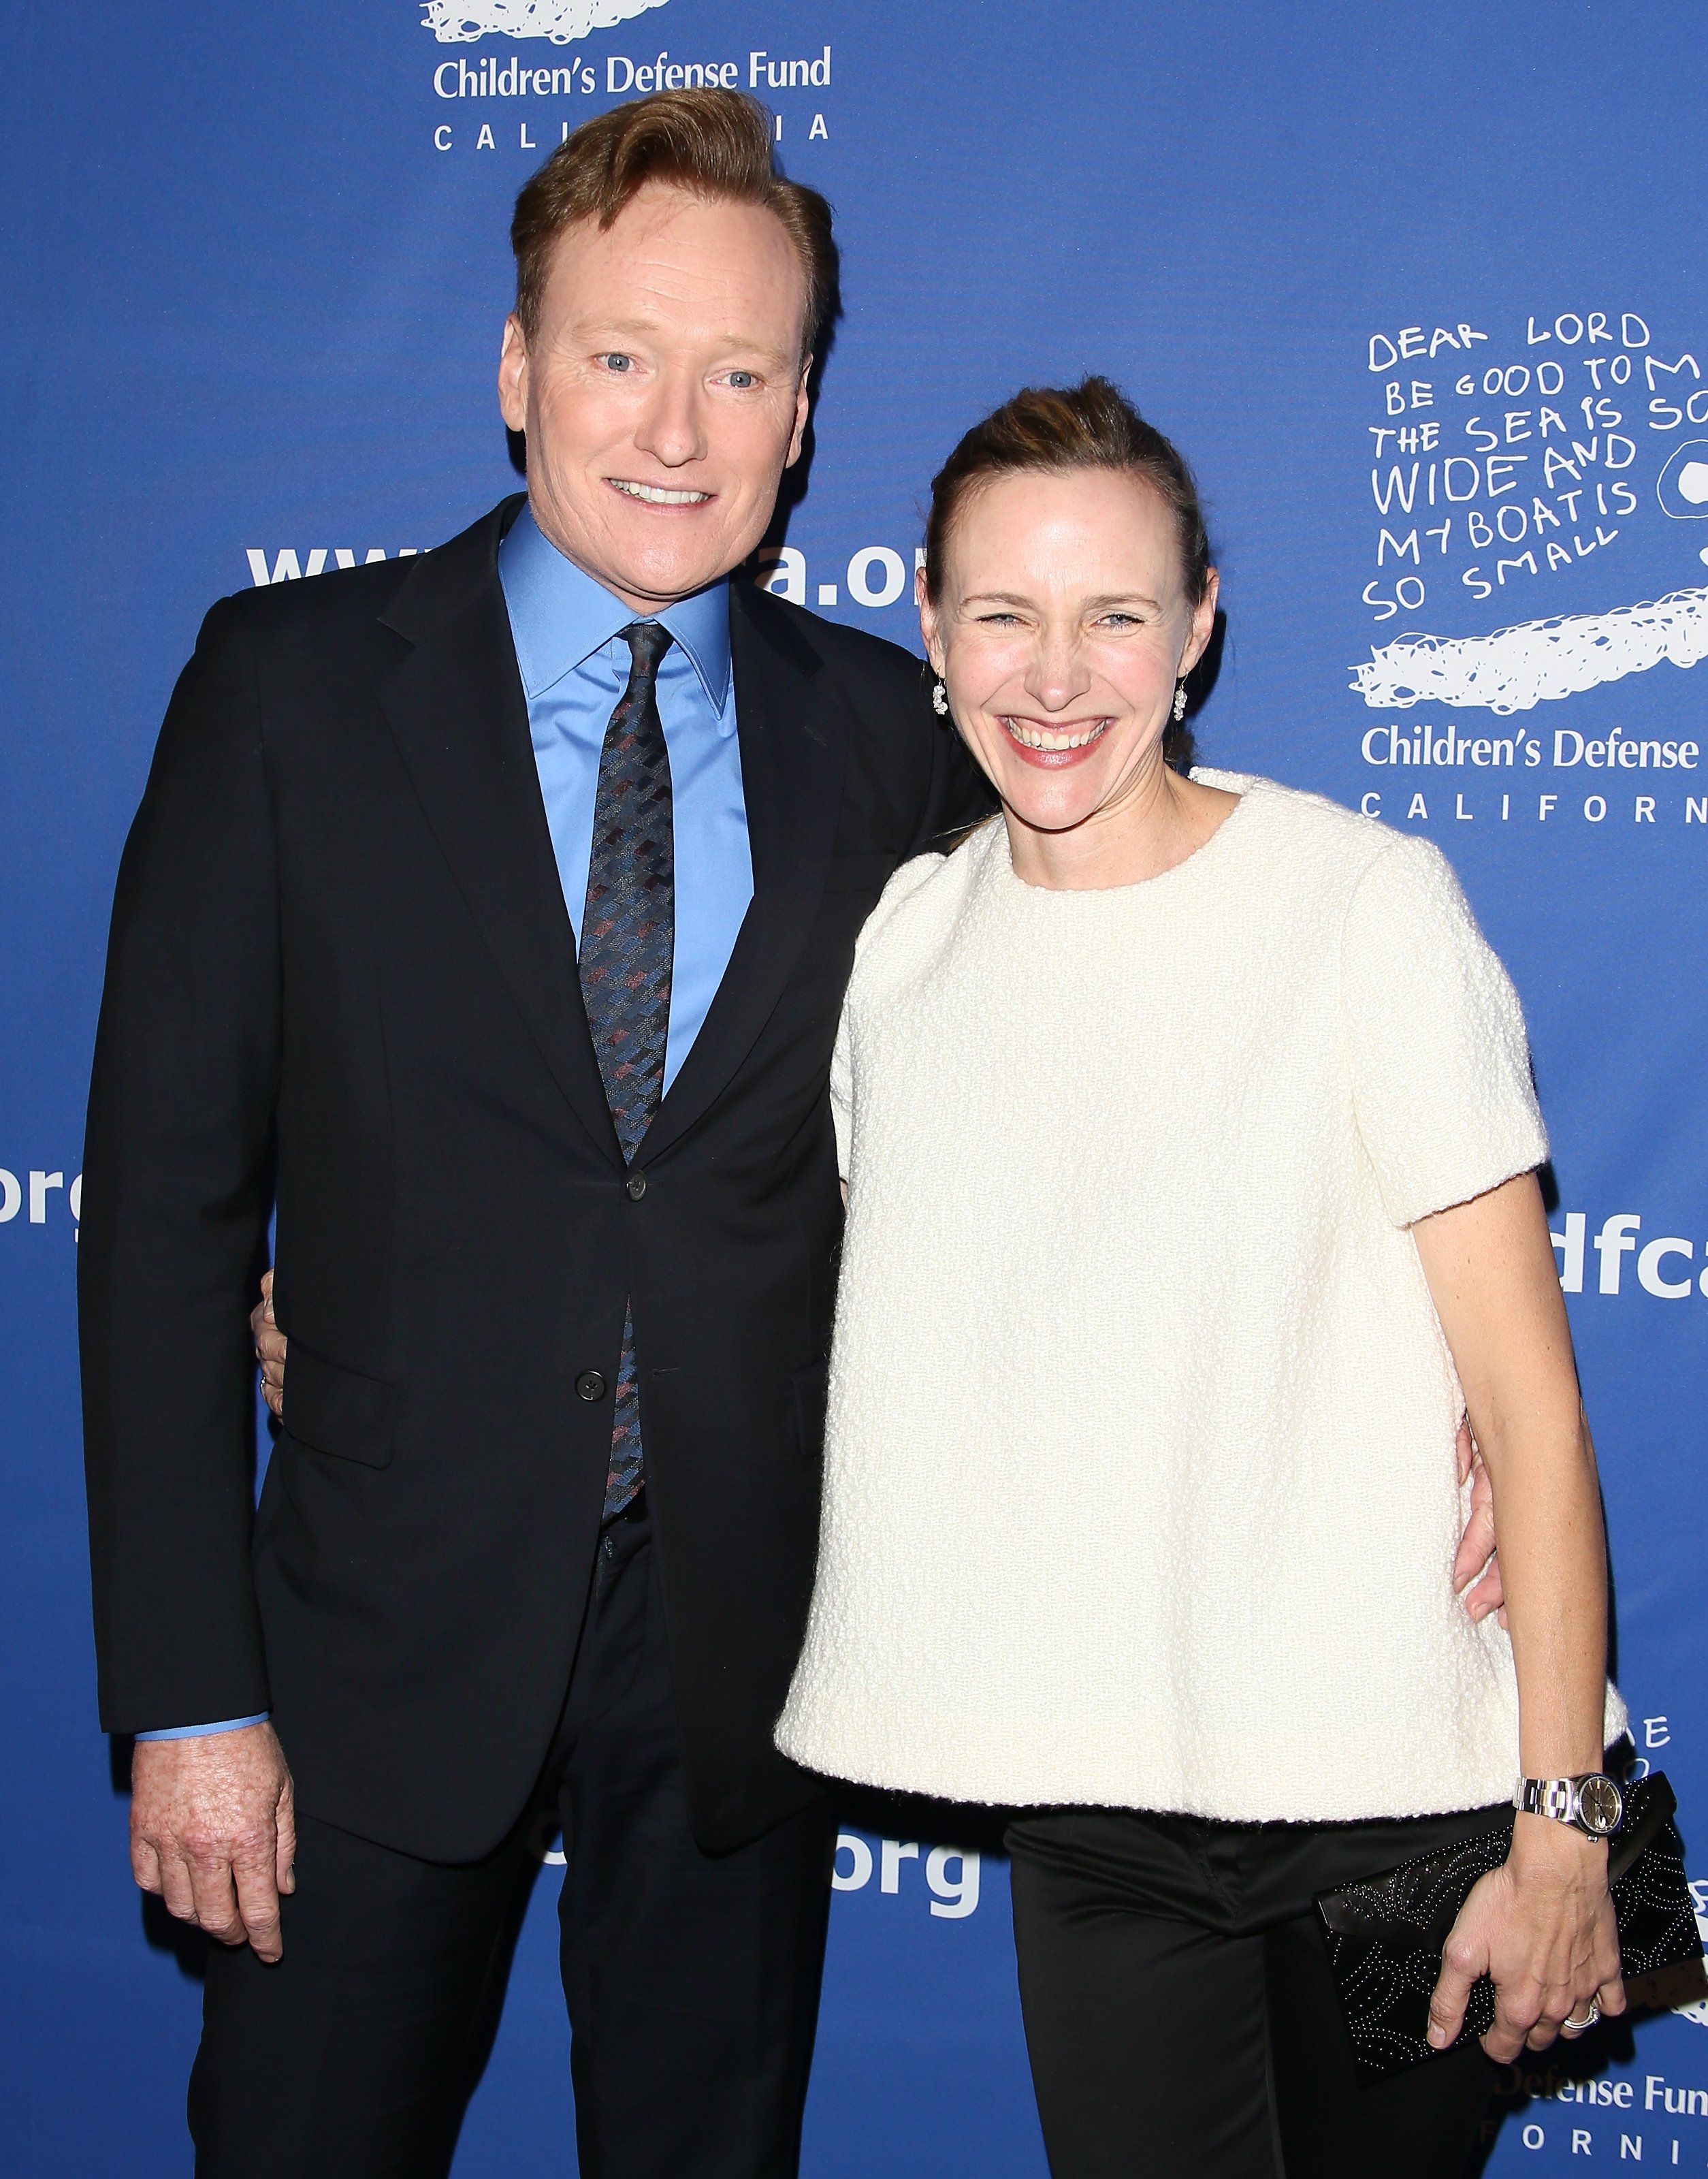 Conan O'Brien and Liza Powel O'Brien attend Children's Defense Fund-California 25th Annual Beat The Odds Awards at Regent Beverly Wilshire Hotel on December 3, 2015, in Beverly Hills, California. | Source: Getty Images